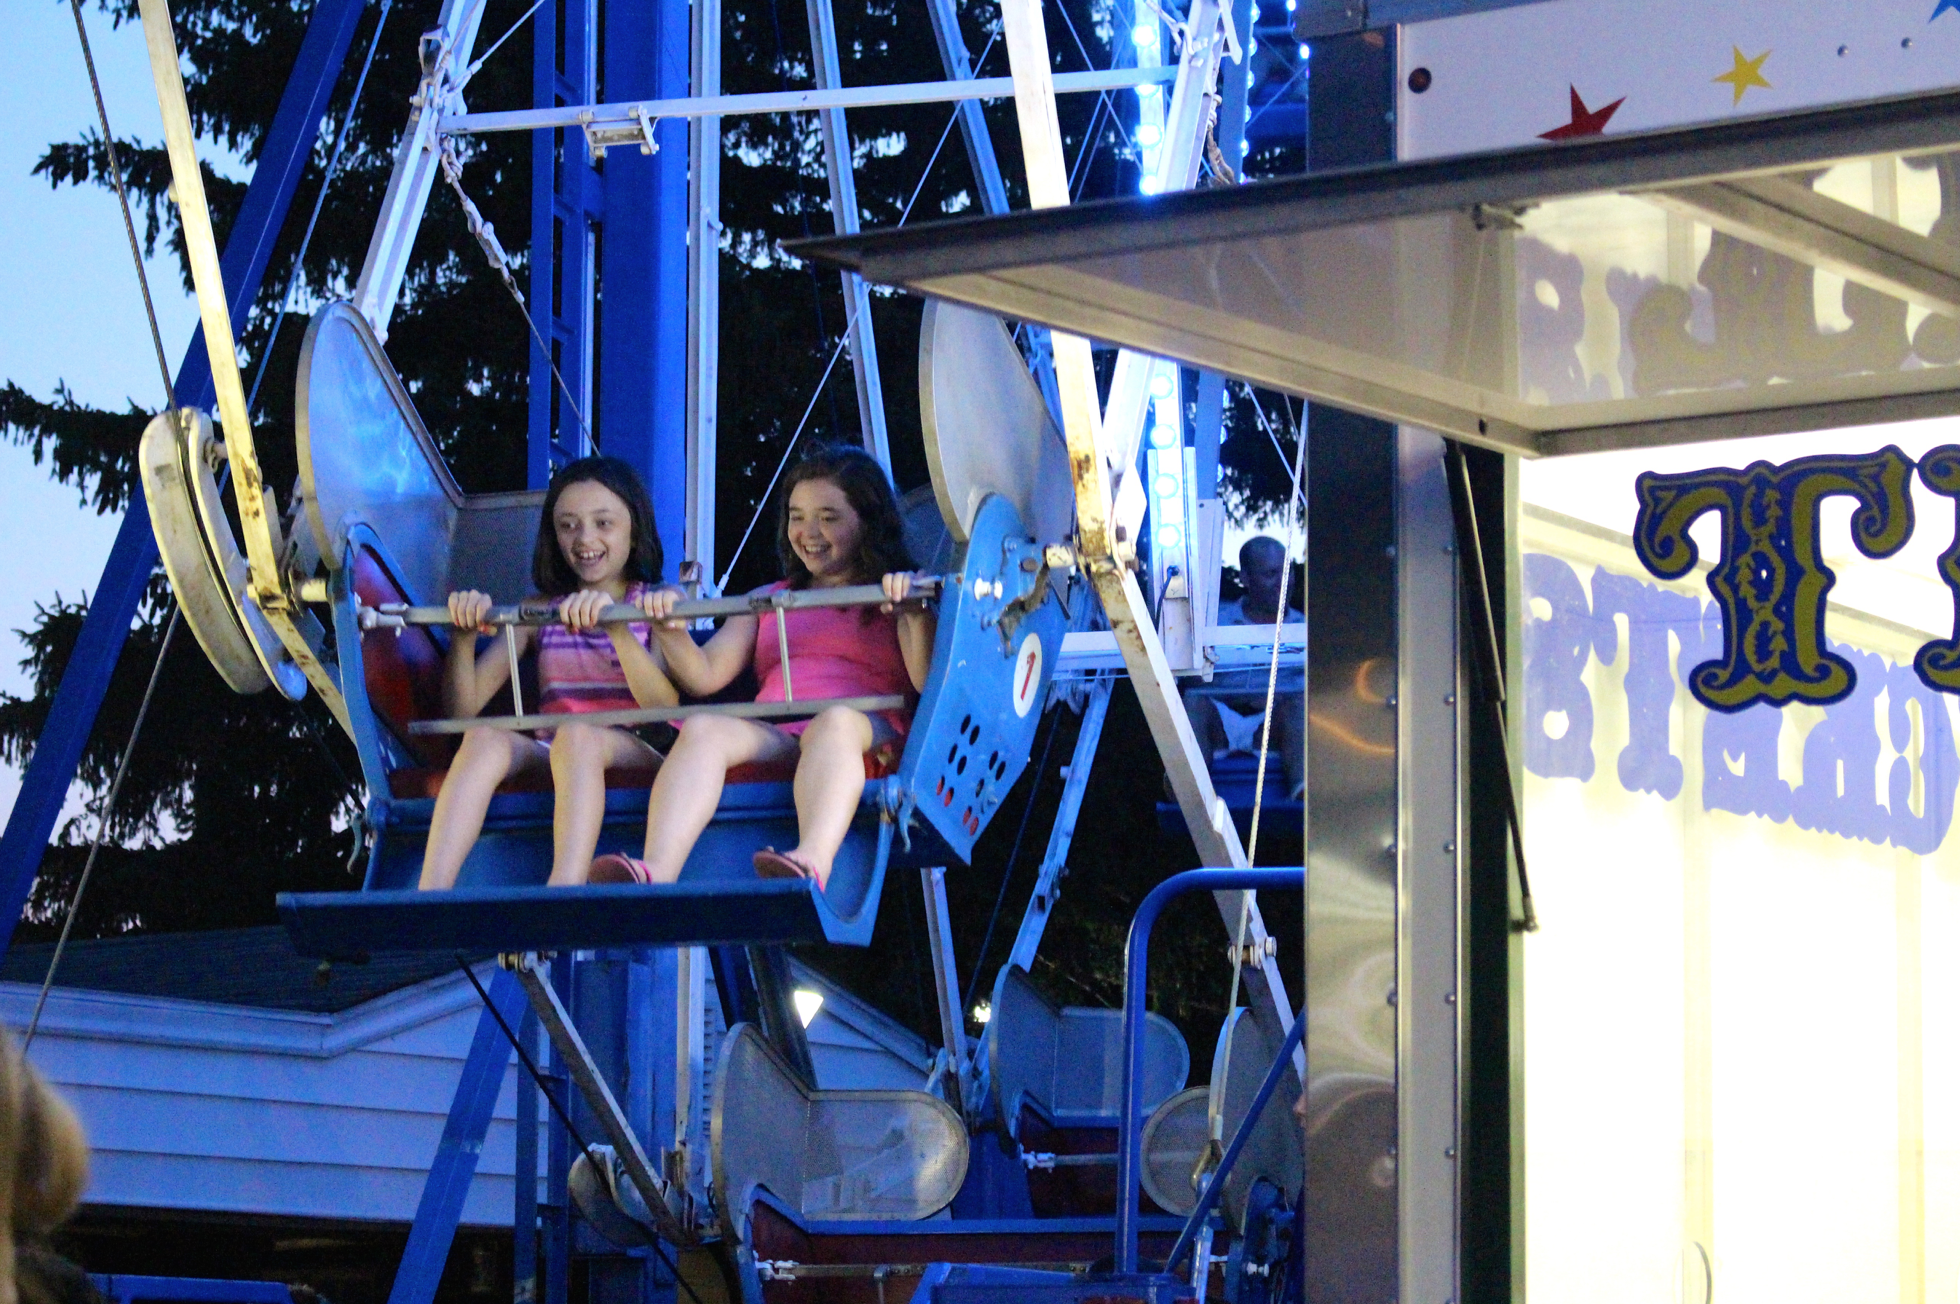 Childrens games and rides are popular at St. Roch's Feast, Friday. Aug. 14, 2015. Credit: Leslie Yager